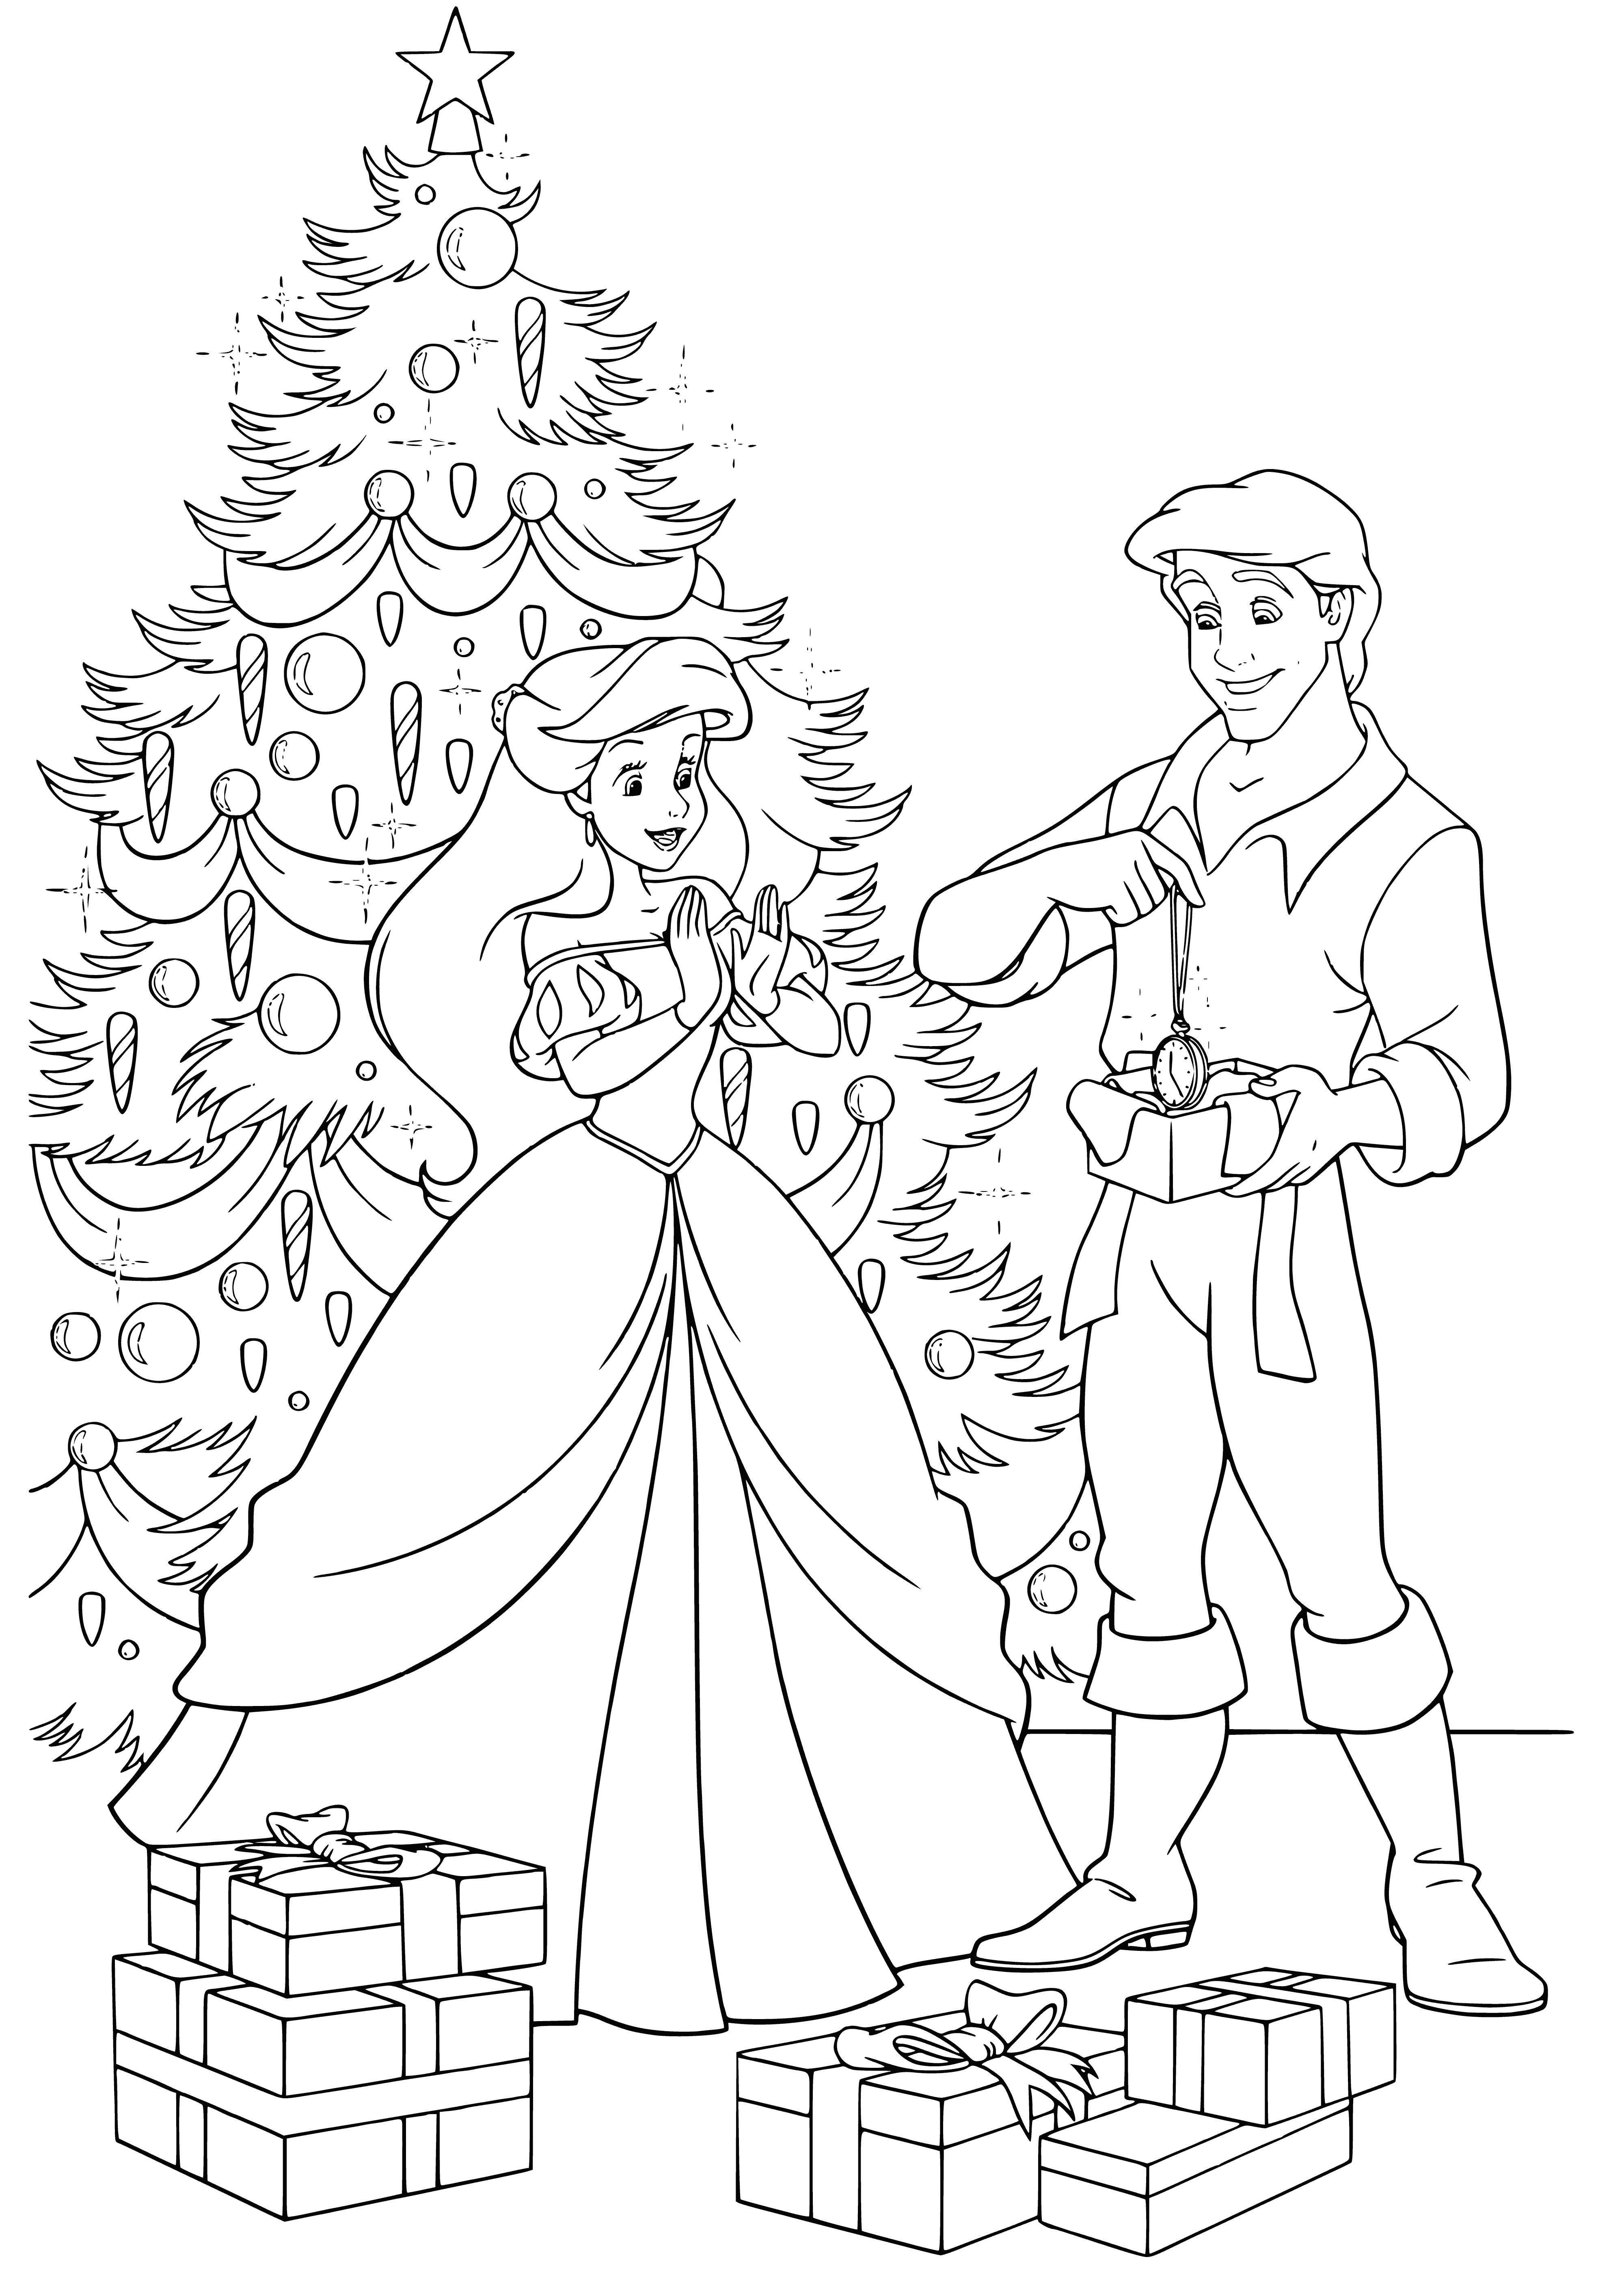 coloring page: Prince Eric and Princess Ariel are celebrating the New Year, smiling, with Eric's arm around Ariel's waist and a glass of champagne. They look like they're about to kiss!